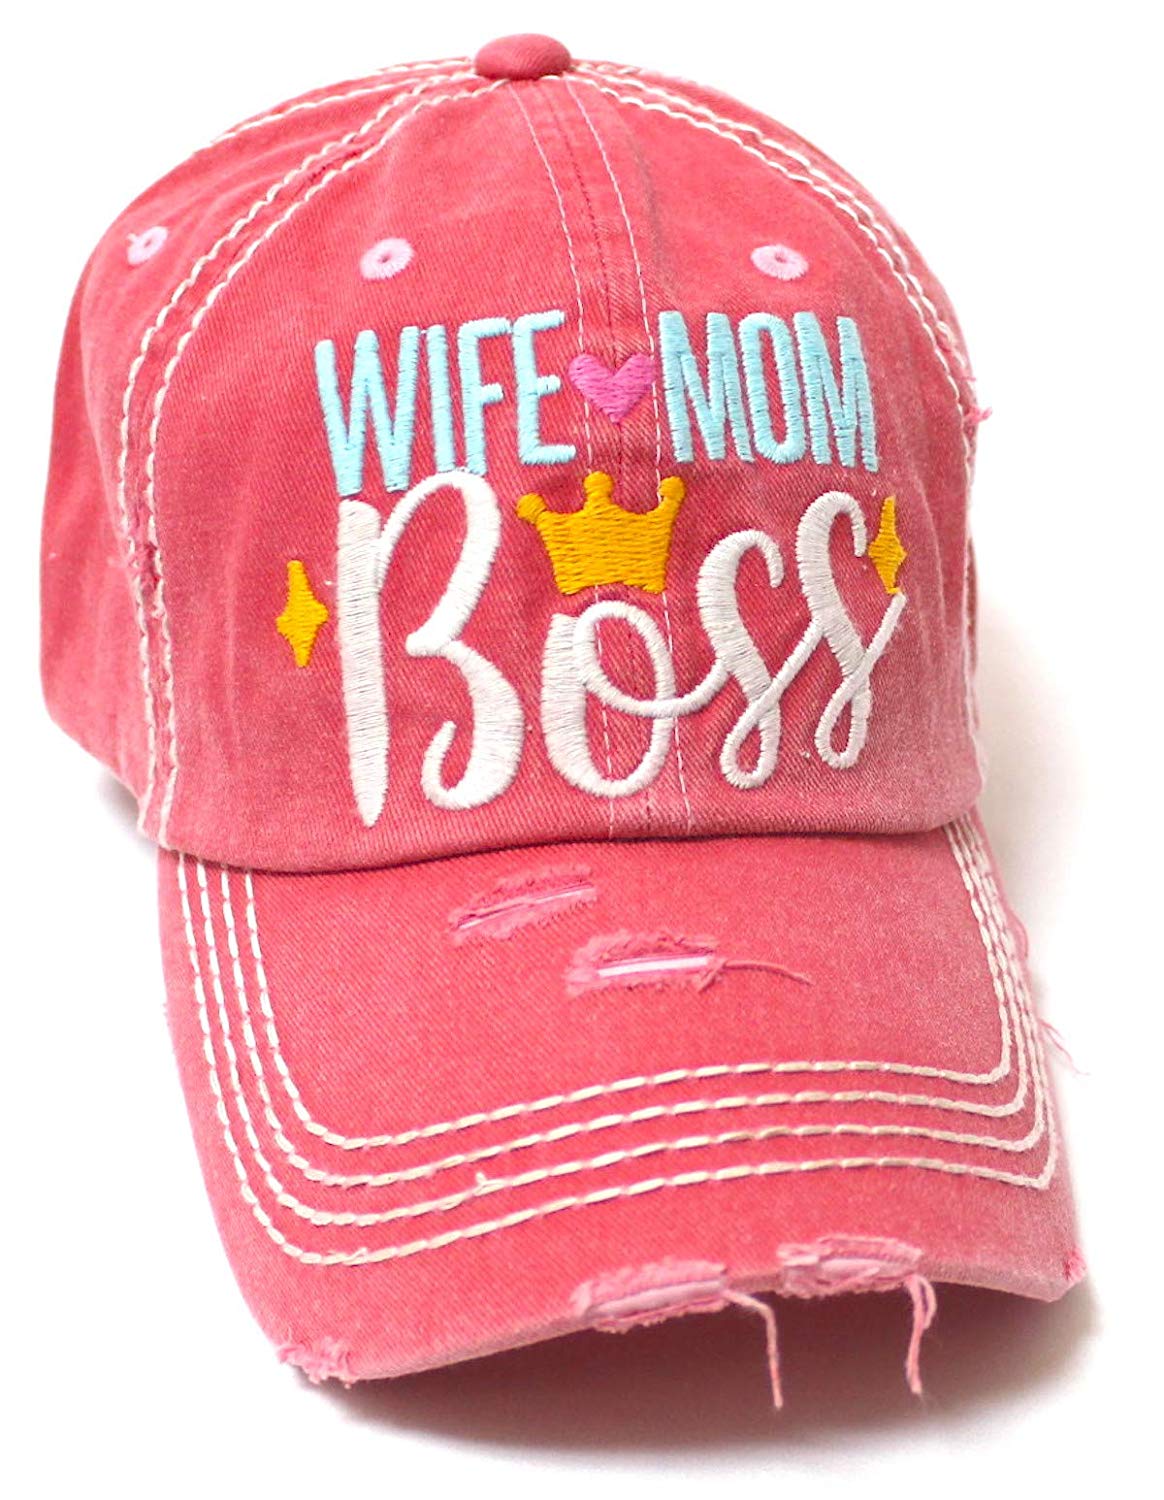 Women's Ballcap Wife Mom Boss Queen Crown Embroidery Hat, Pink Rose - Caps 'N Vintage 